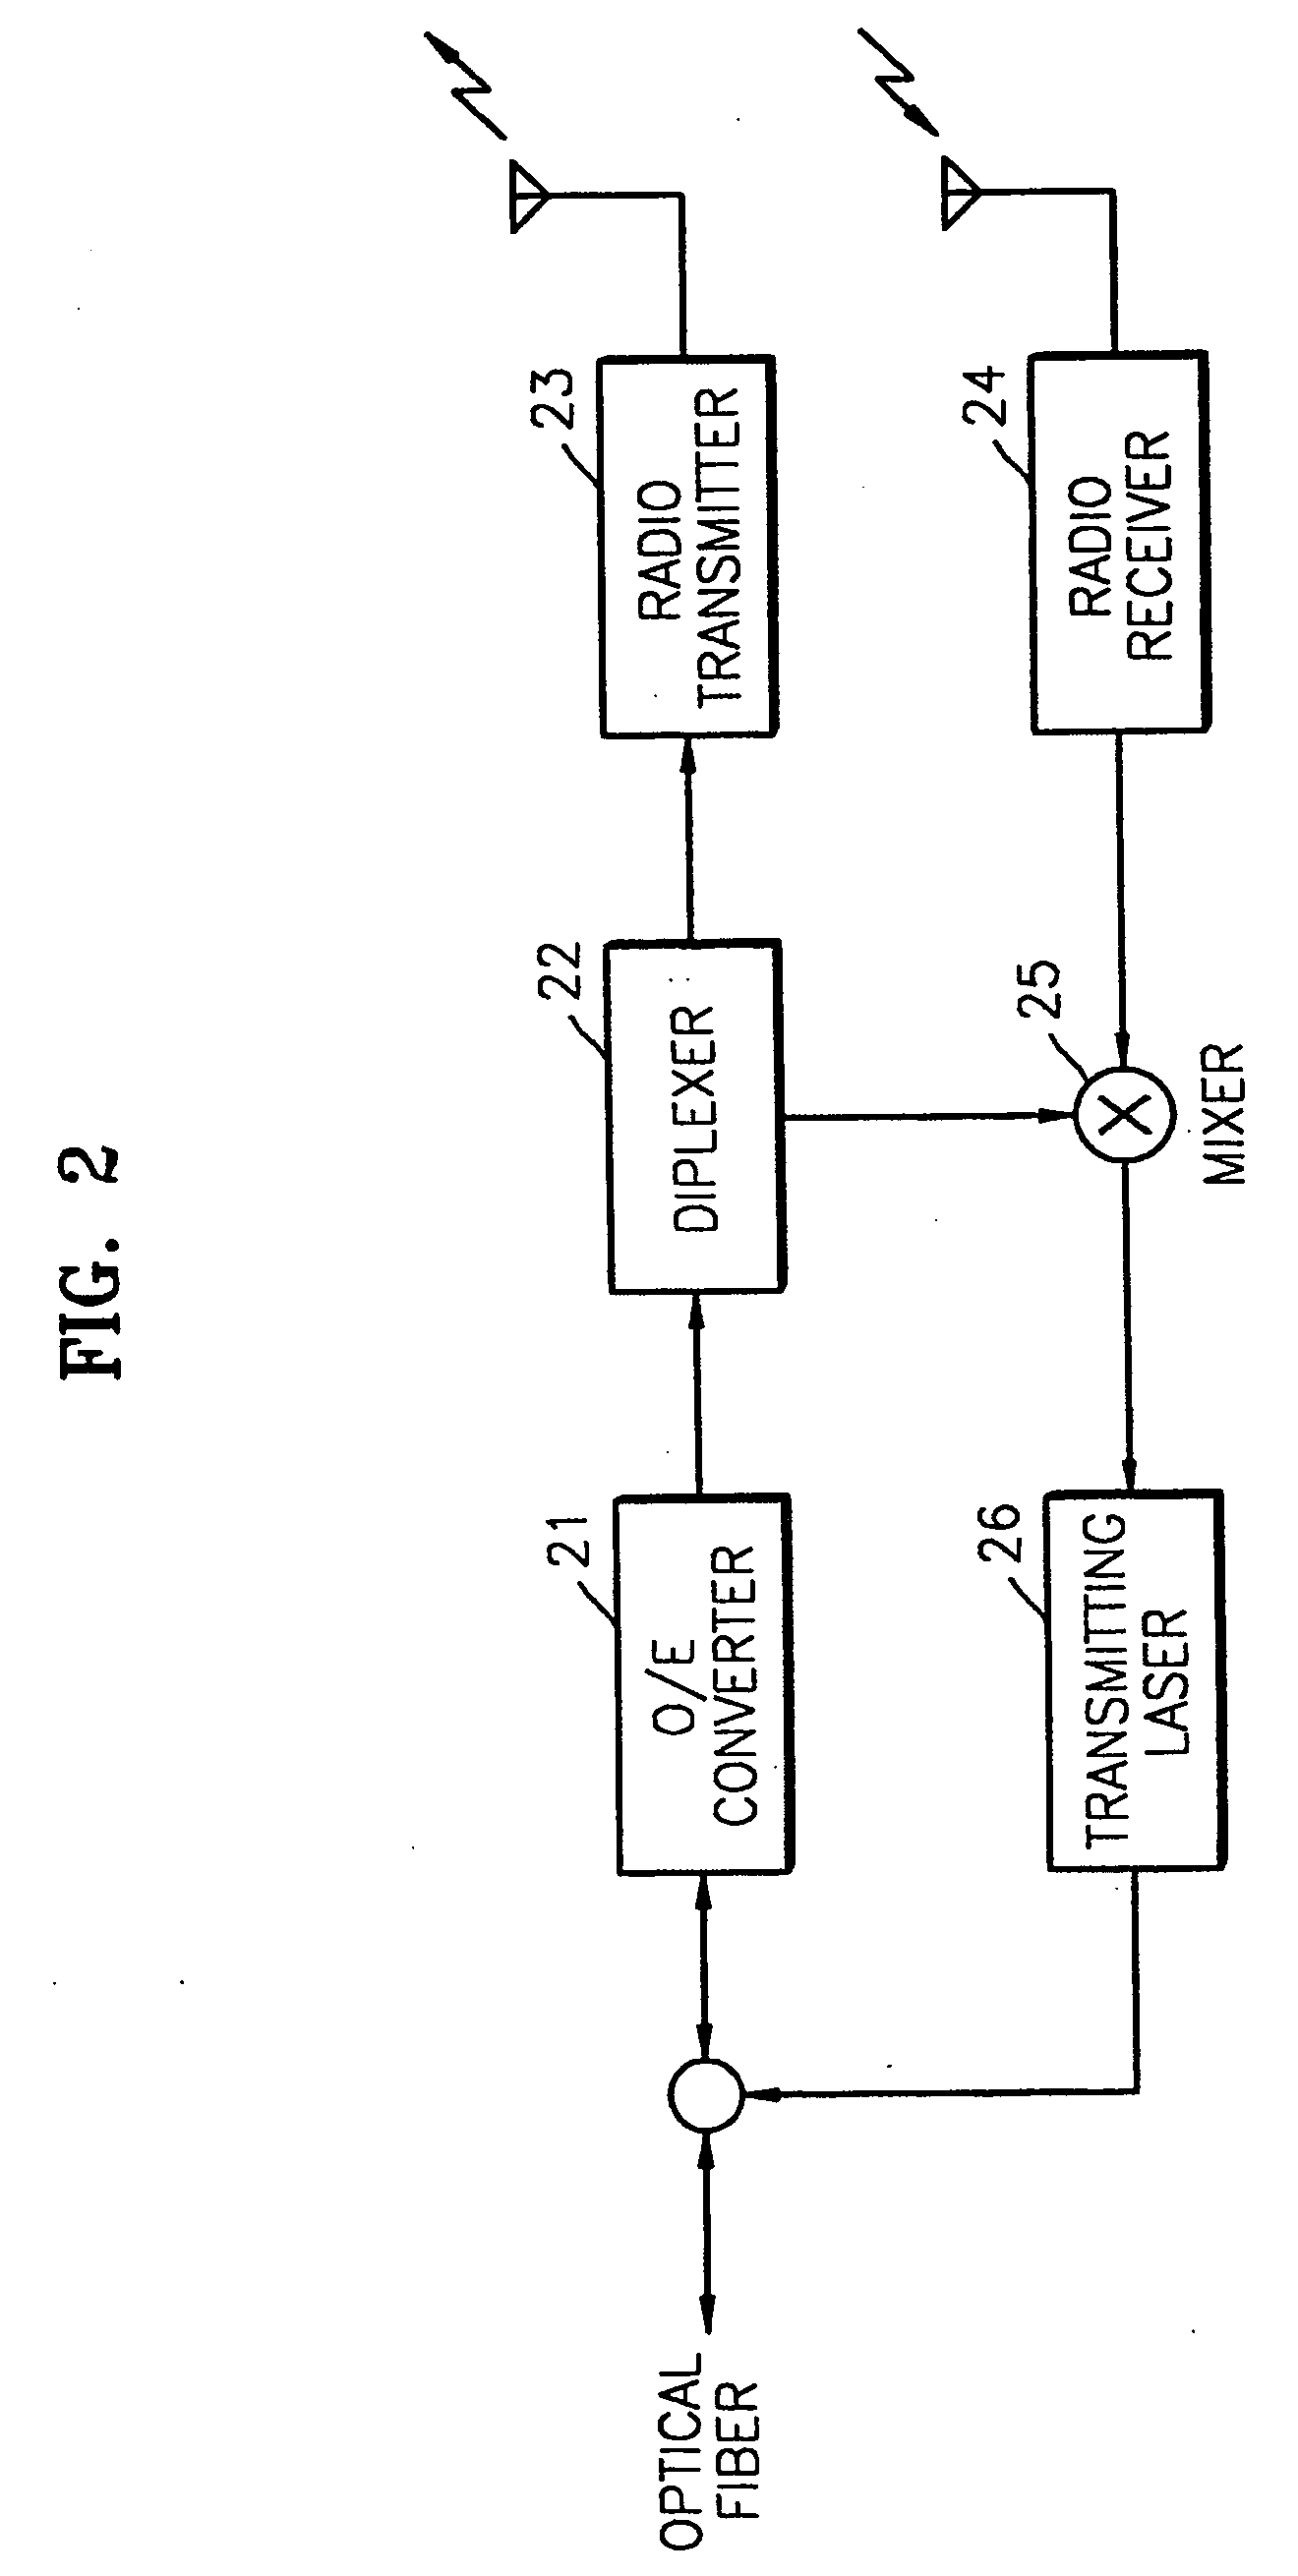 Method and apparatus for duplex communication in hybrid fiber-radio systems